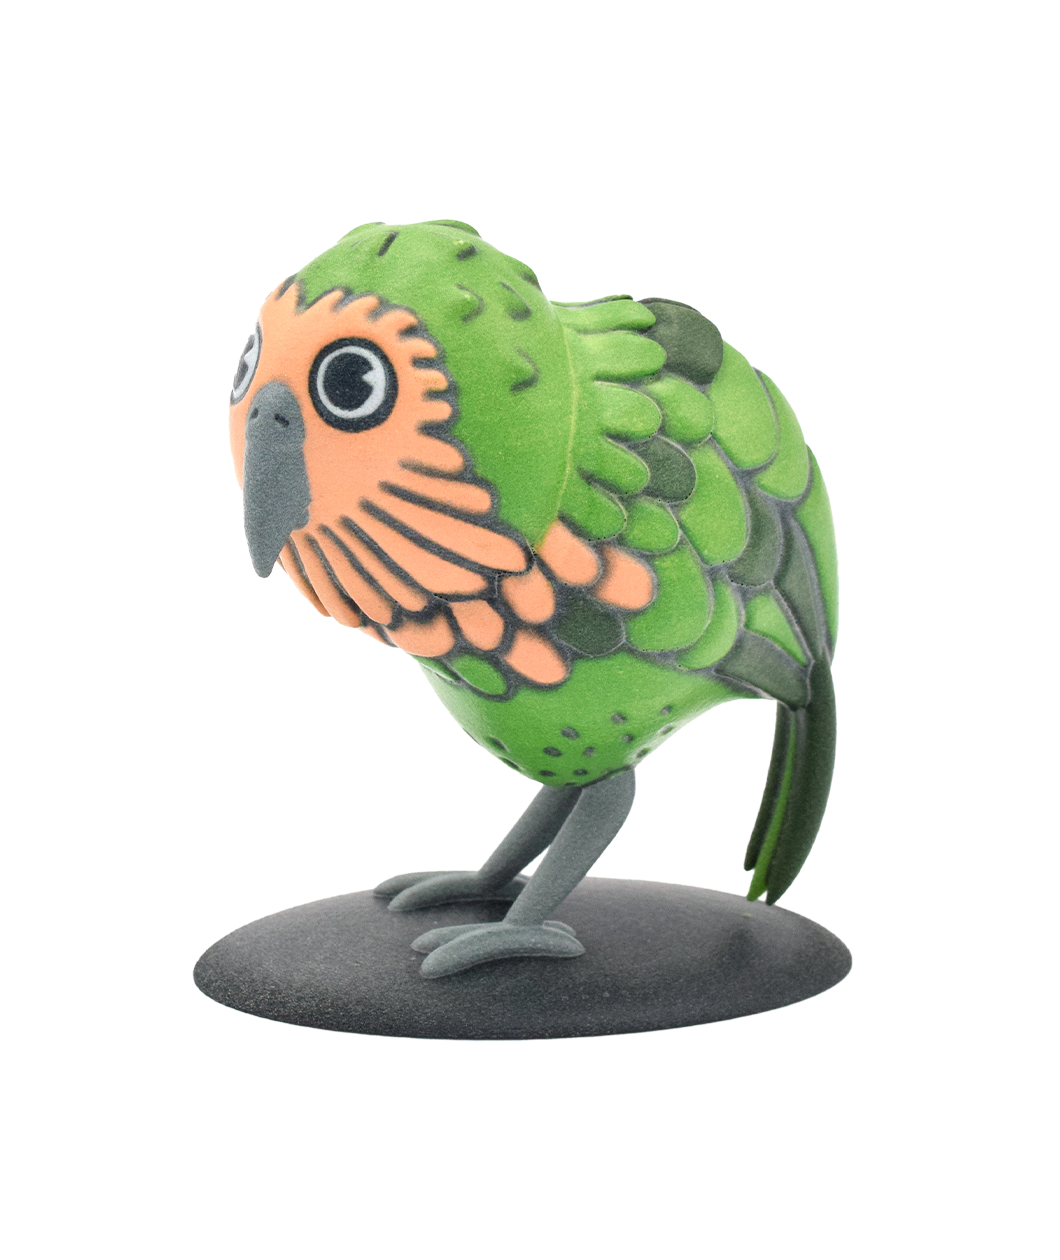 A 3d printed kakapo with a tan face, gray beak, with green and dark green feathers, dark gray legs, standing on a black disc base - from Bizarre Beasts